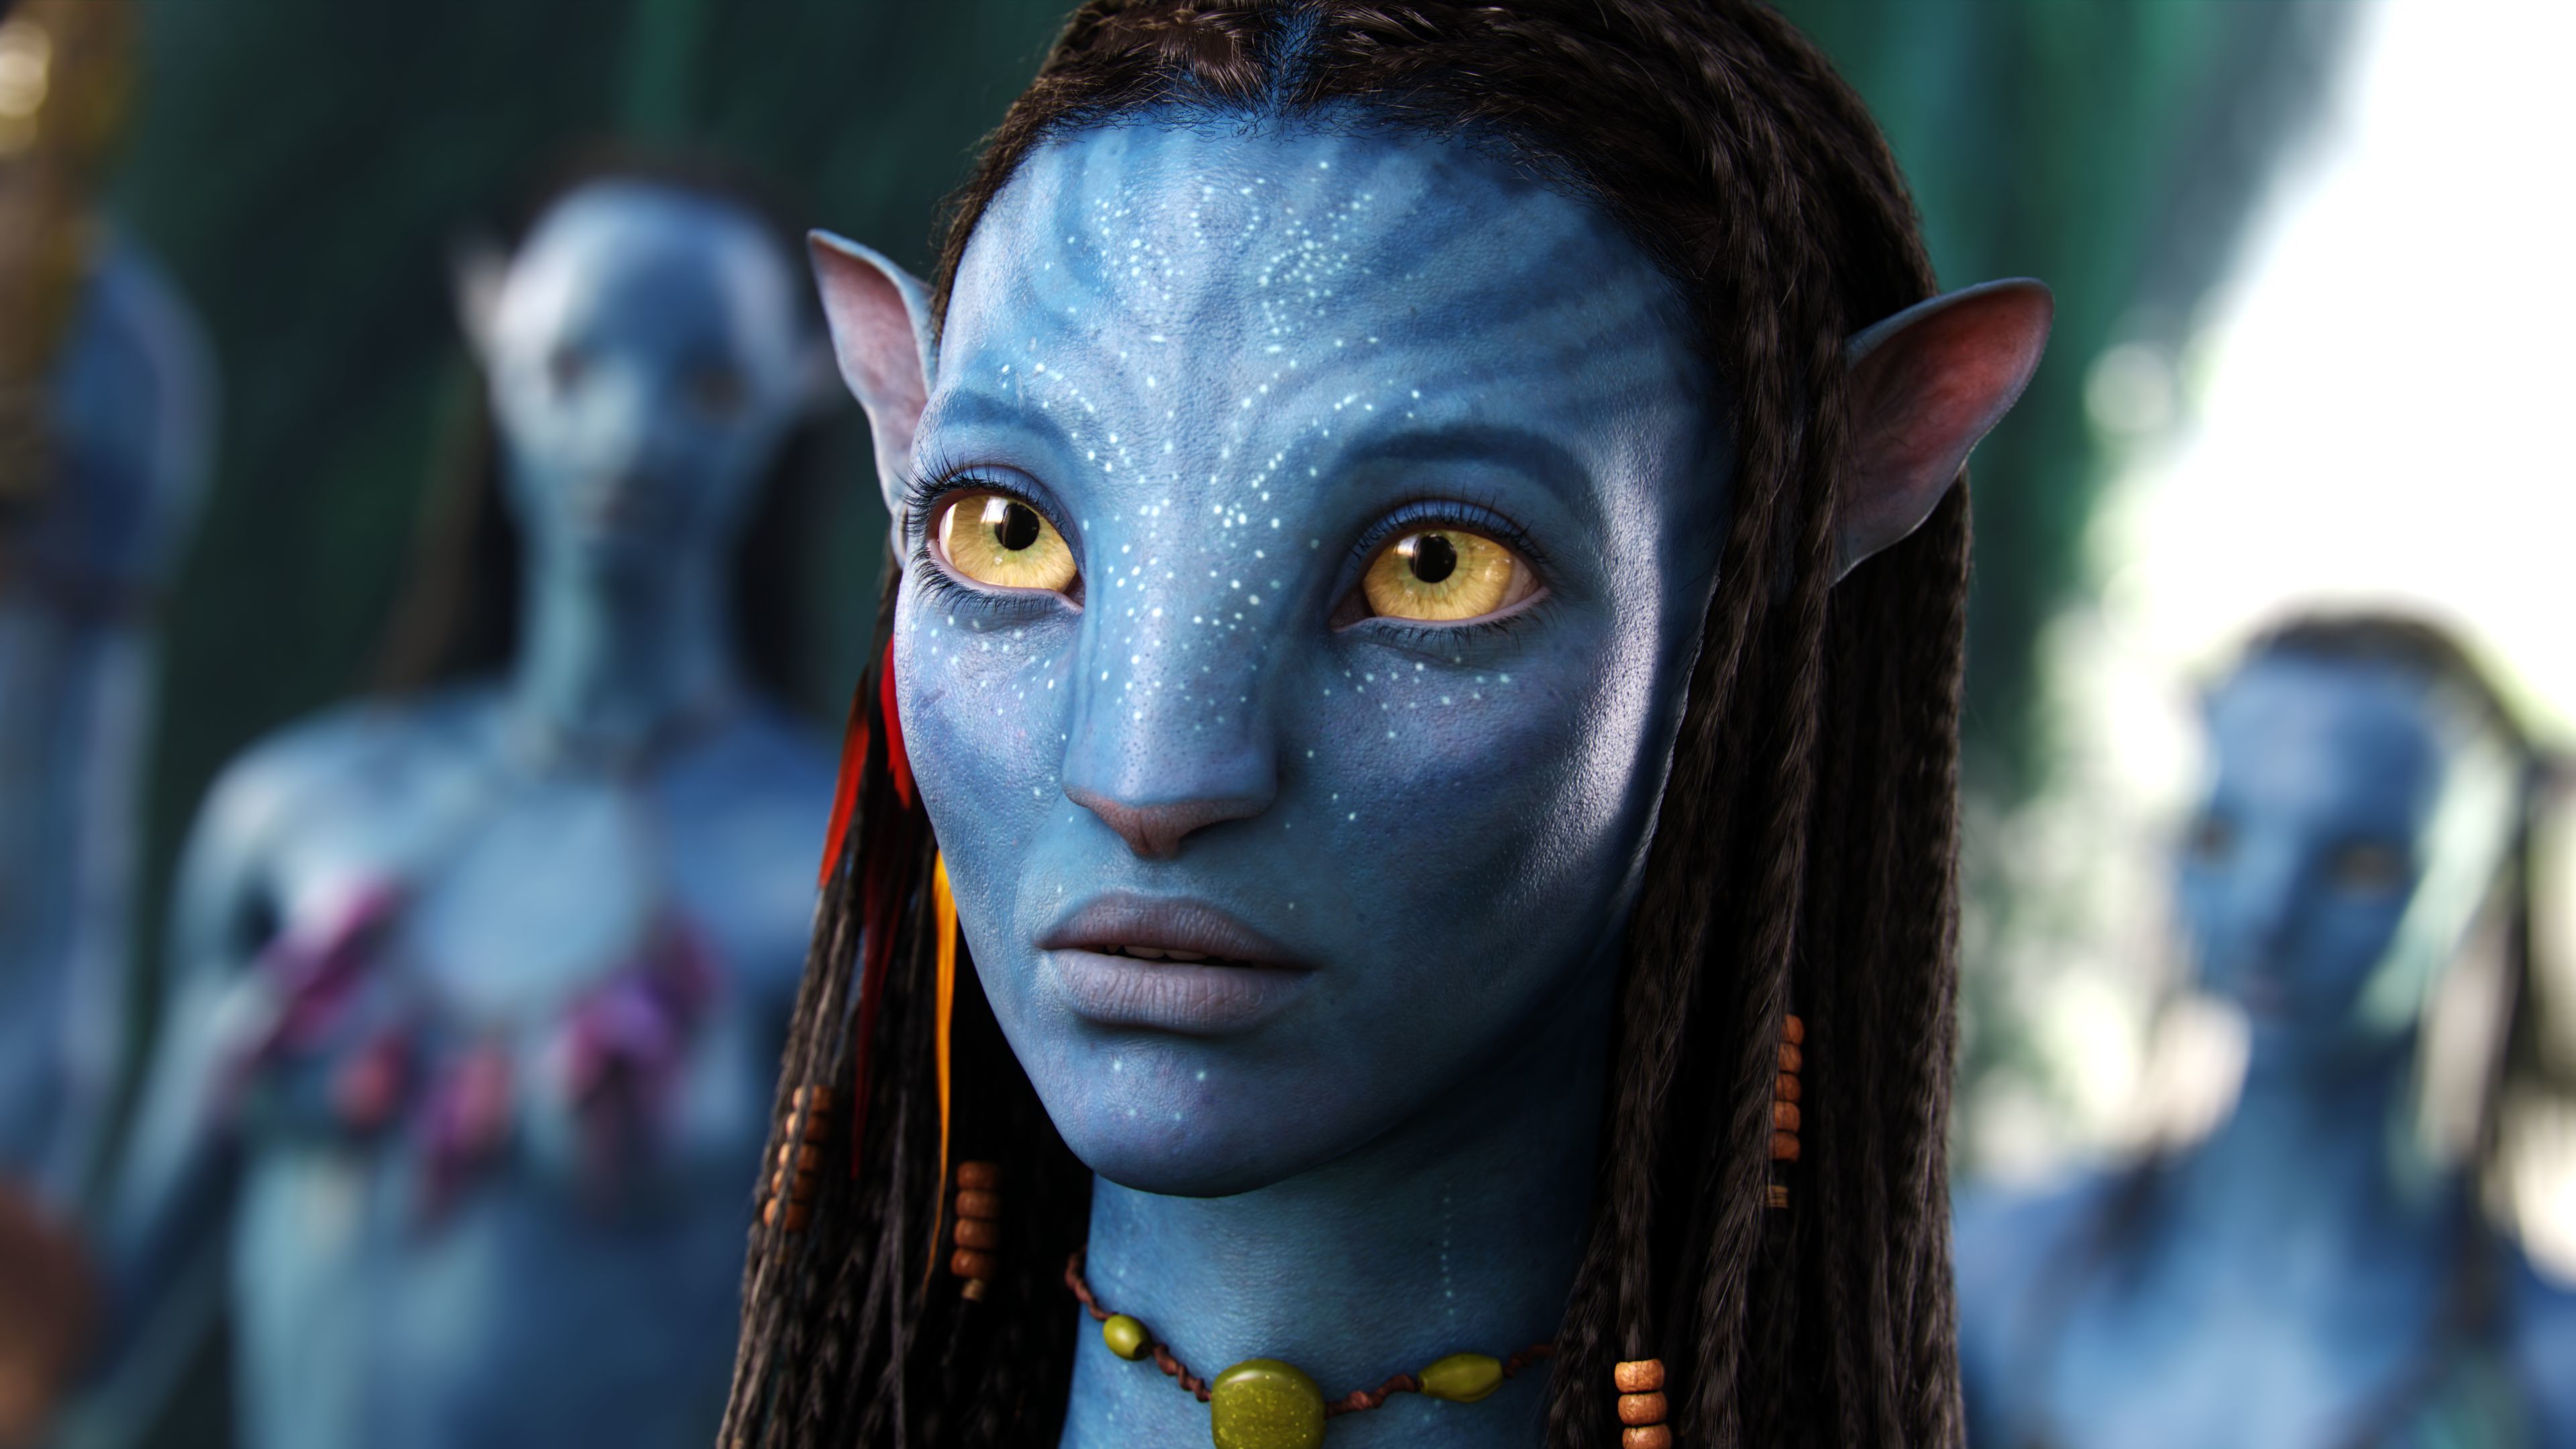 Avatar Movie Cast 2009  Avatar 2 Cast 2020 Then And Now 2018  Lifestyle  Today  a photo on Flickriver